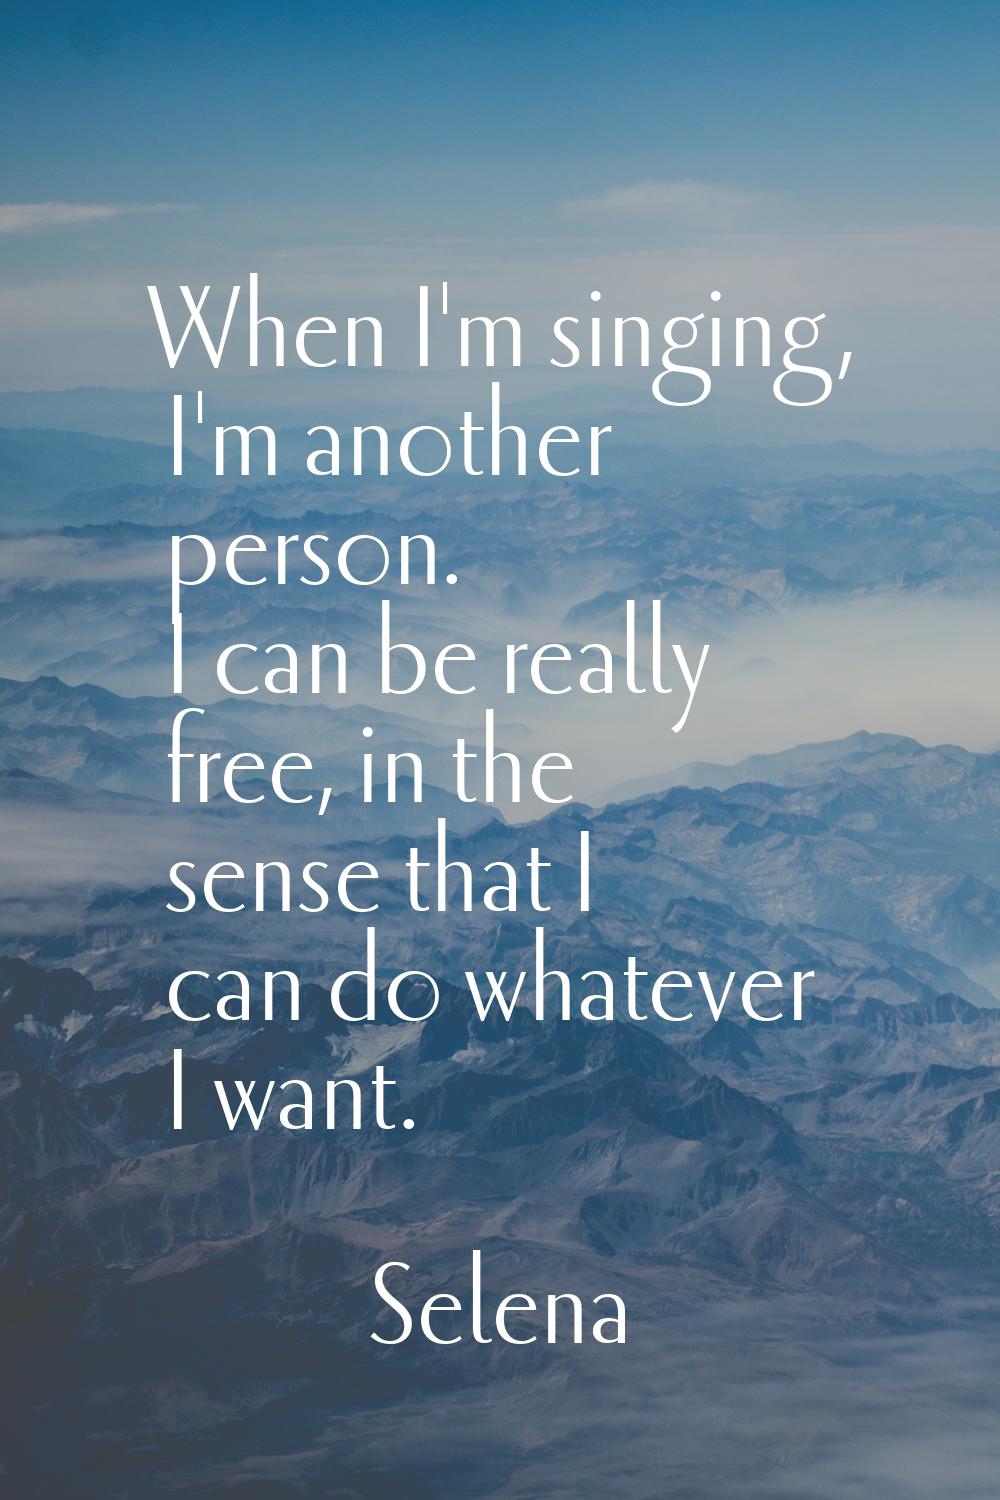 When I'm singing, I'm another person. I can be really free, in the sense that I can do whatever I w